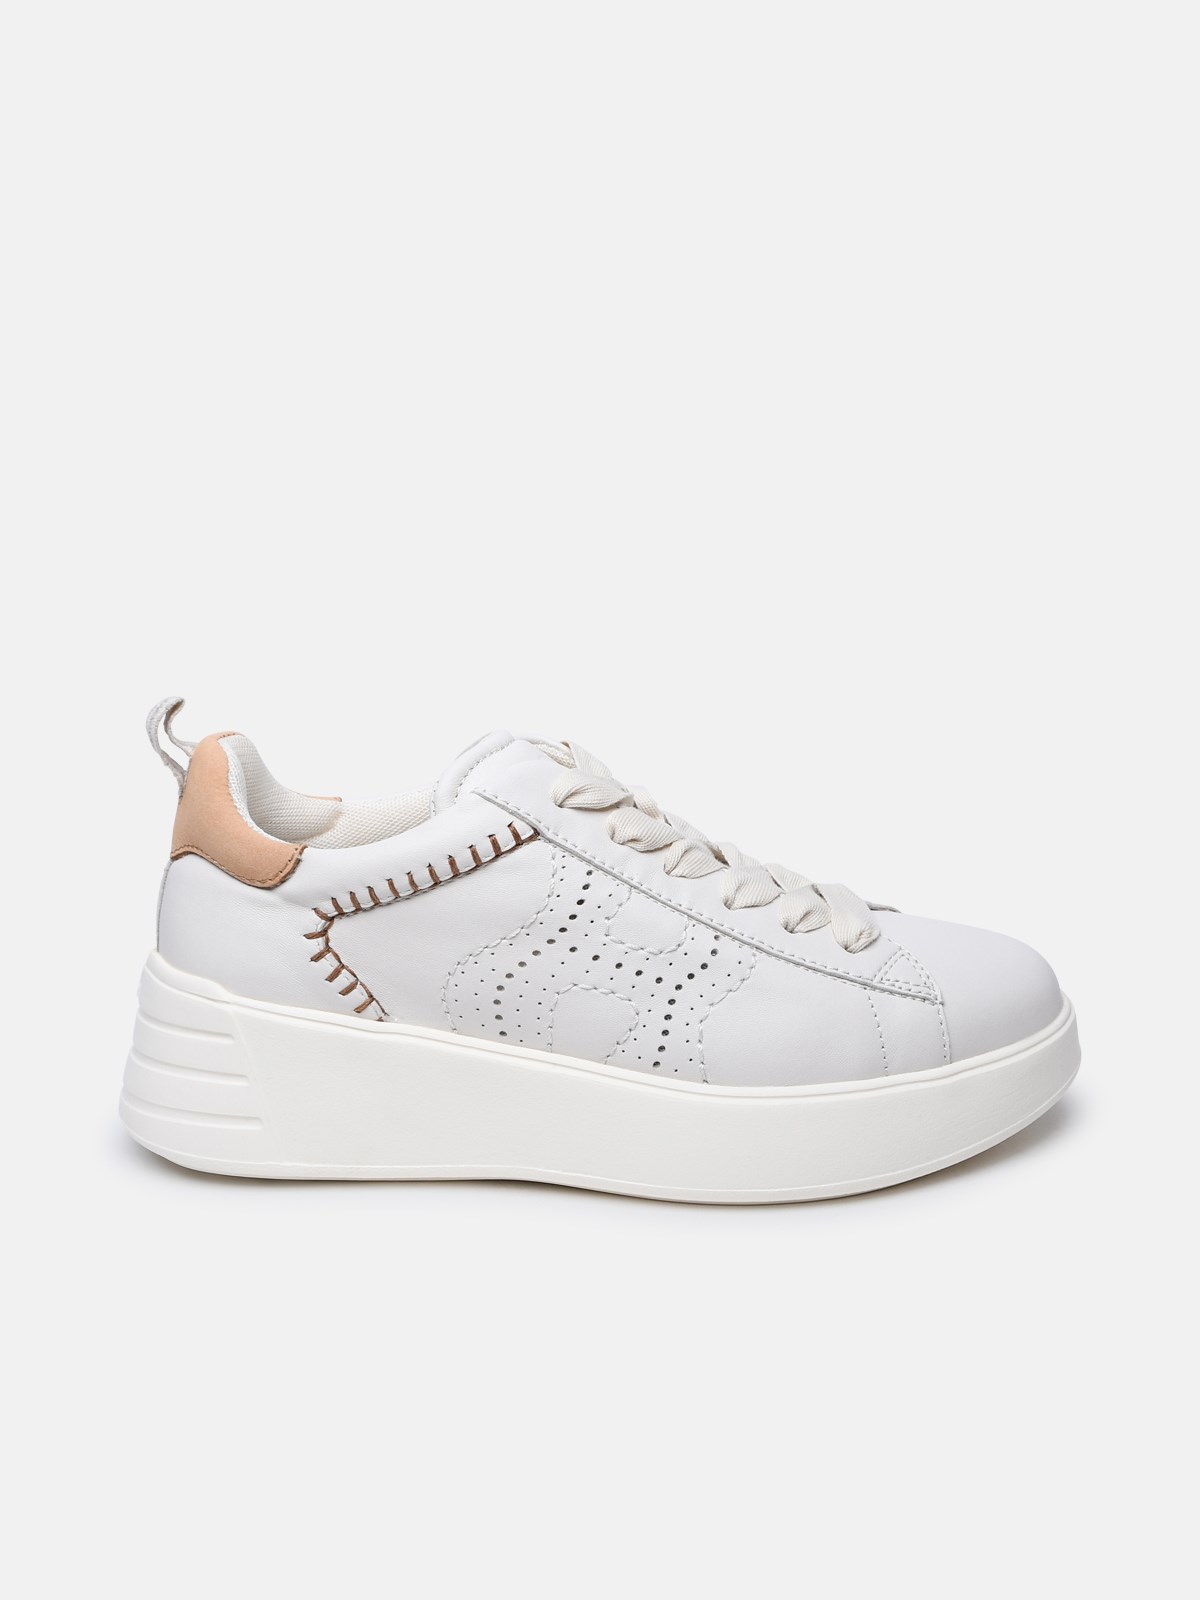 Hogan White Leather Sneakers In Beige